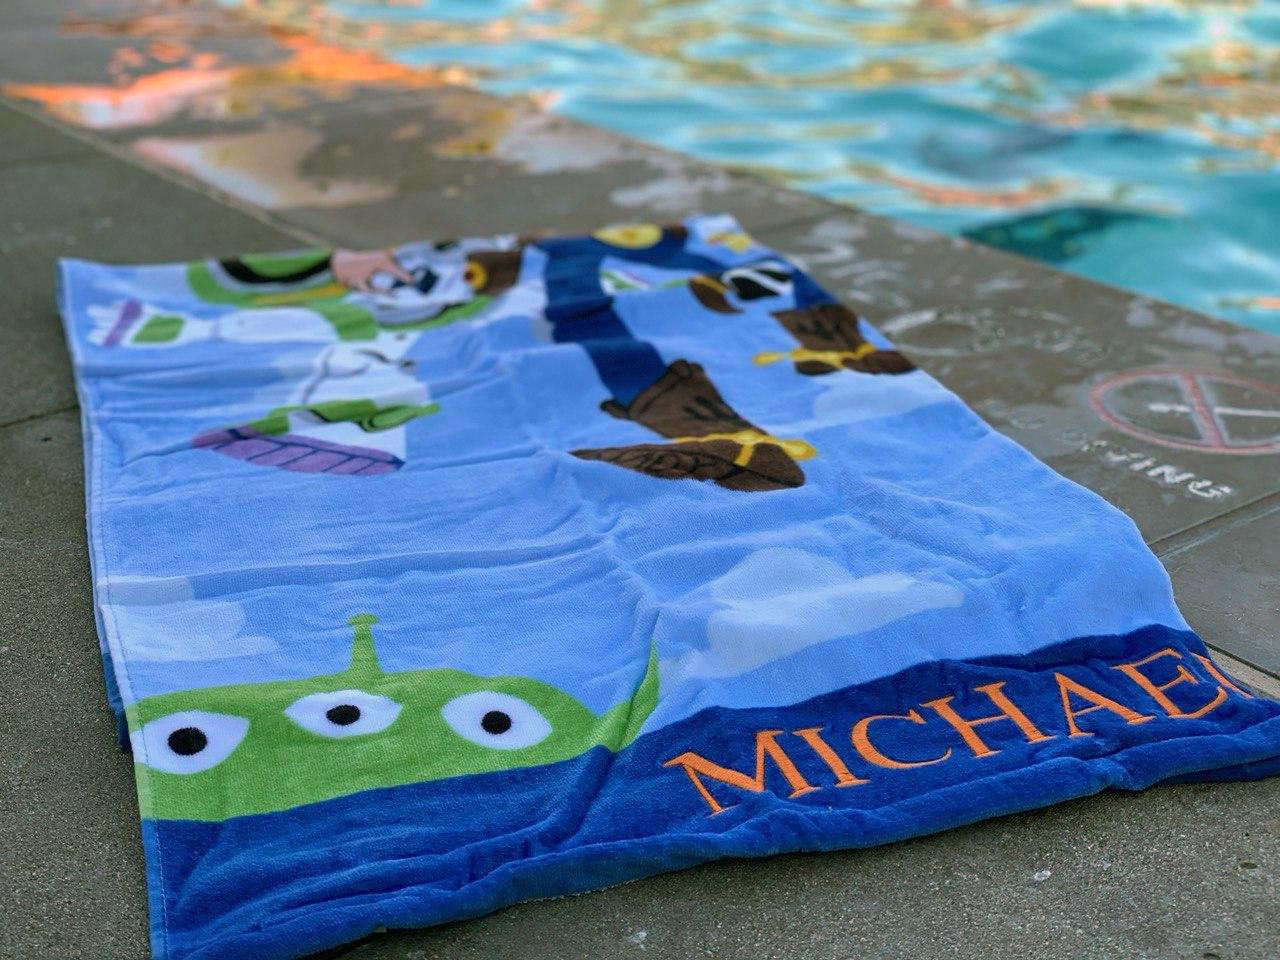 Personalized beach towel from Personalization Mall